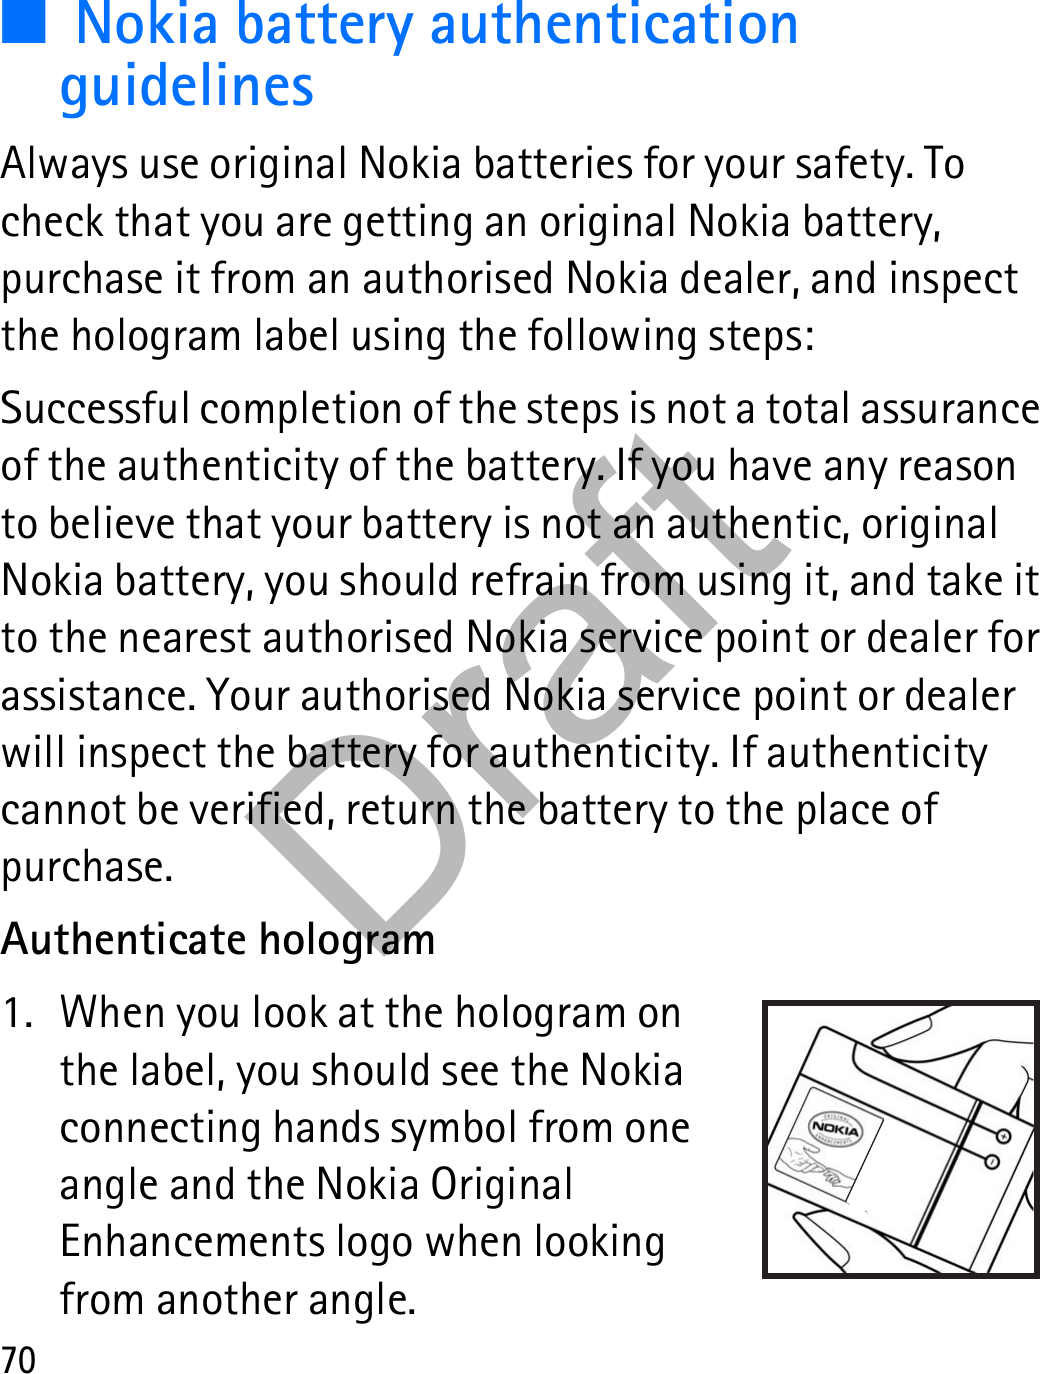 70■Nokia battery authentication guidelinesAlways use original Nokia batteries for your safety. To check that you are getting an original Nokia battery, purchase it from an authorised Nokia dealer, and inspect the hologram label using the following steps:Successful completion of the steps is not a total assurance of the authenticity of the battery. If you have any reason to believe that your battery is not an authentic, original Nokia battery, you should refrain from using it, and take it to the nearest authorised Nokia service point or dealer for assistance. Your authorised Nokia service point or dealer will inspect the battery for authenticity. If authenticity cannot be verified, return the battery to the place of purchase.Authenticate hologram1. When you look at the hologram on the label, you should see the Nokia connecting hands symbol from one angle and the Nokia Original Enhancements logo when looking from another angle. Draft